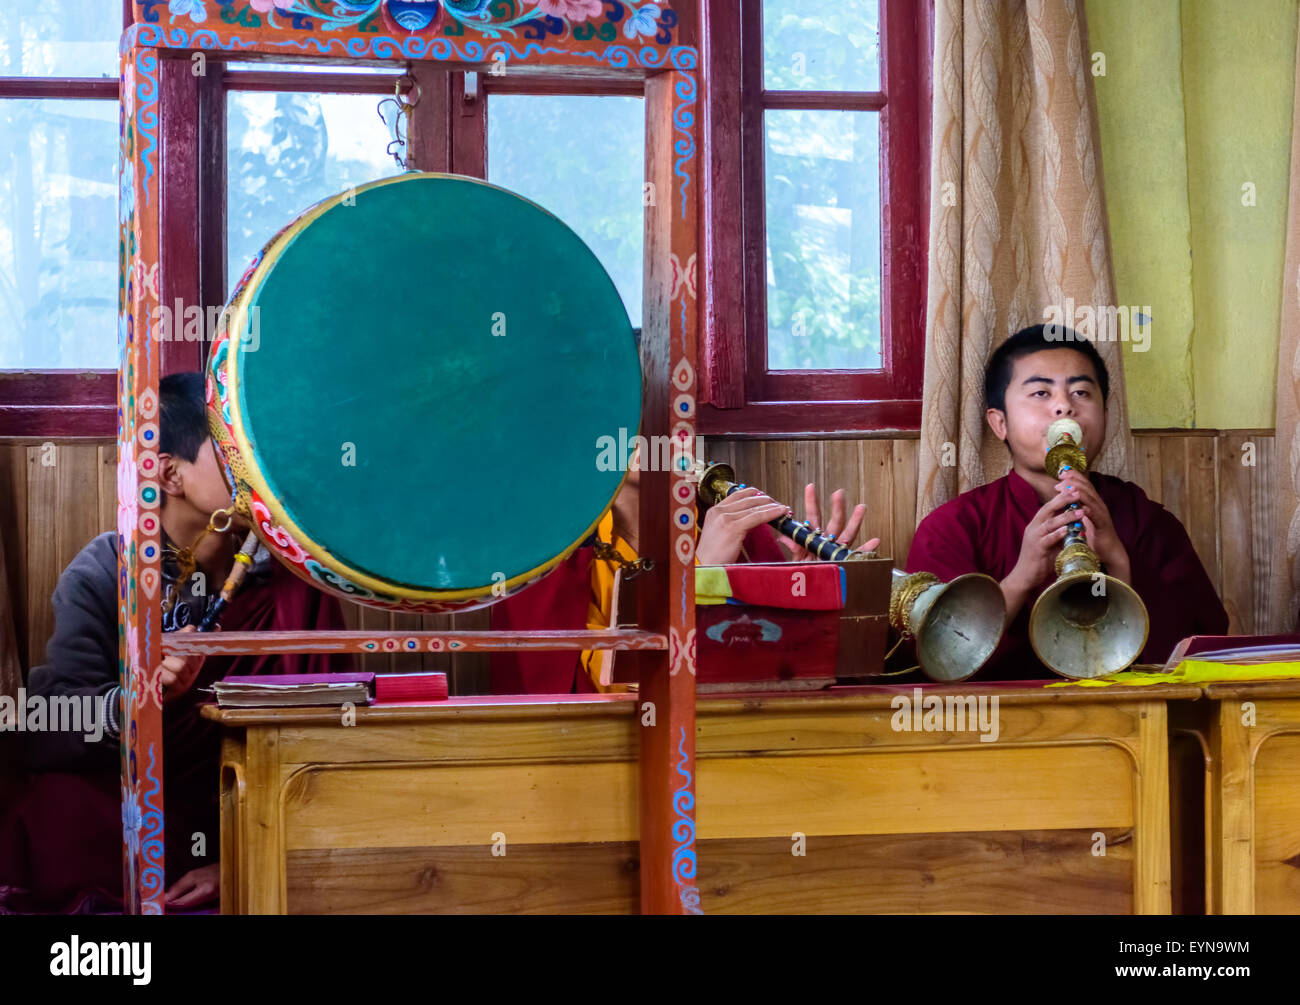 Buddhist priests, Lamas, praying inside a monastery in India, playing traditional flute, gong with copy space Stock Photo